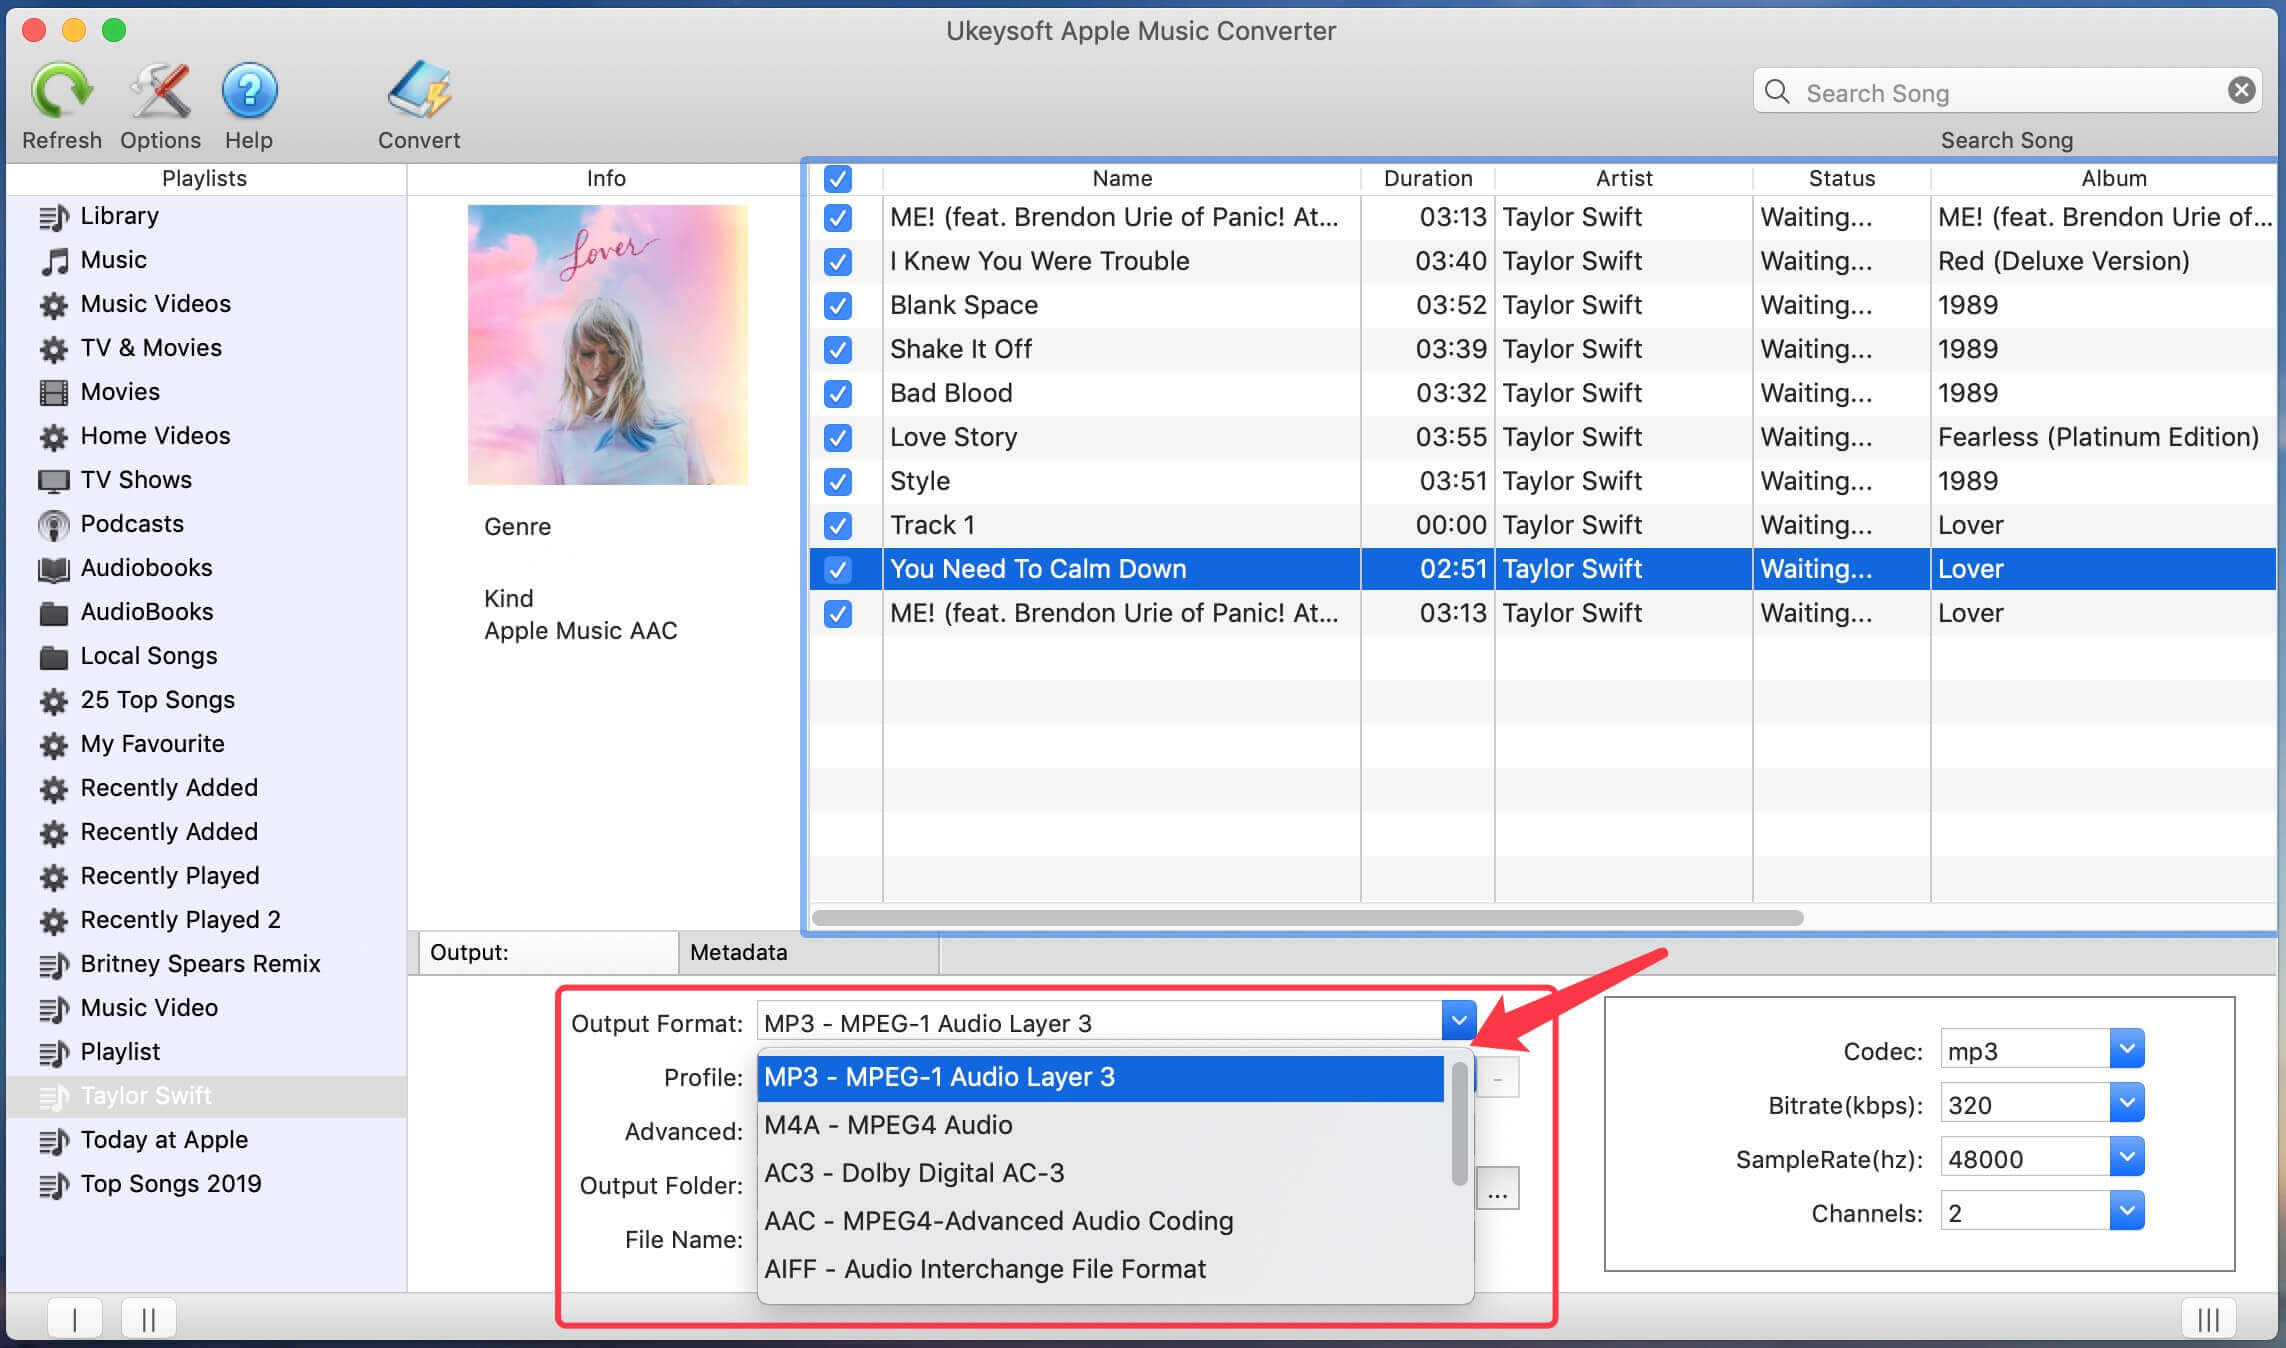 Choose MP3 to download